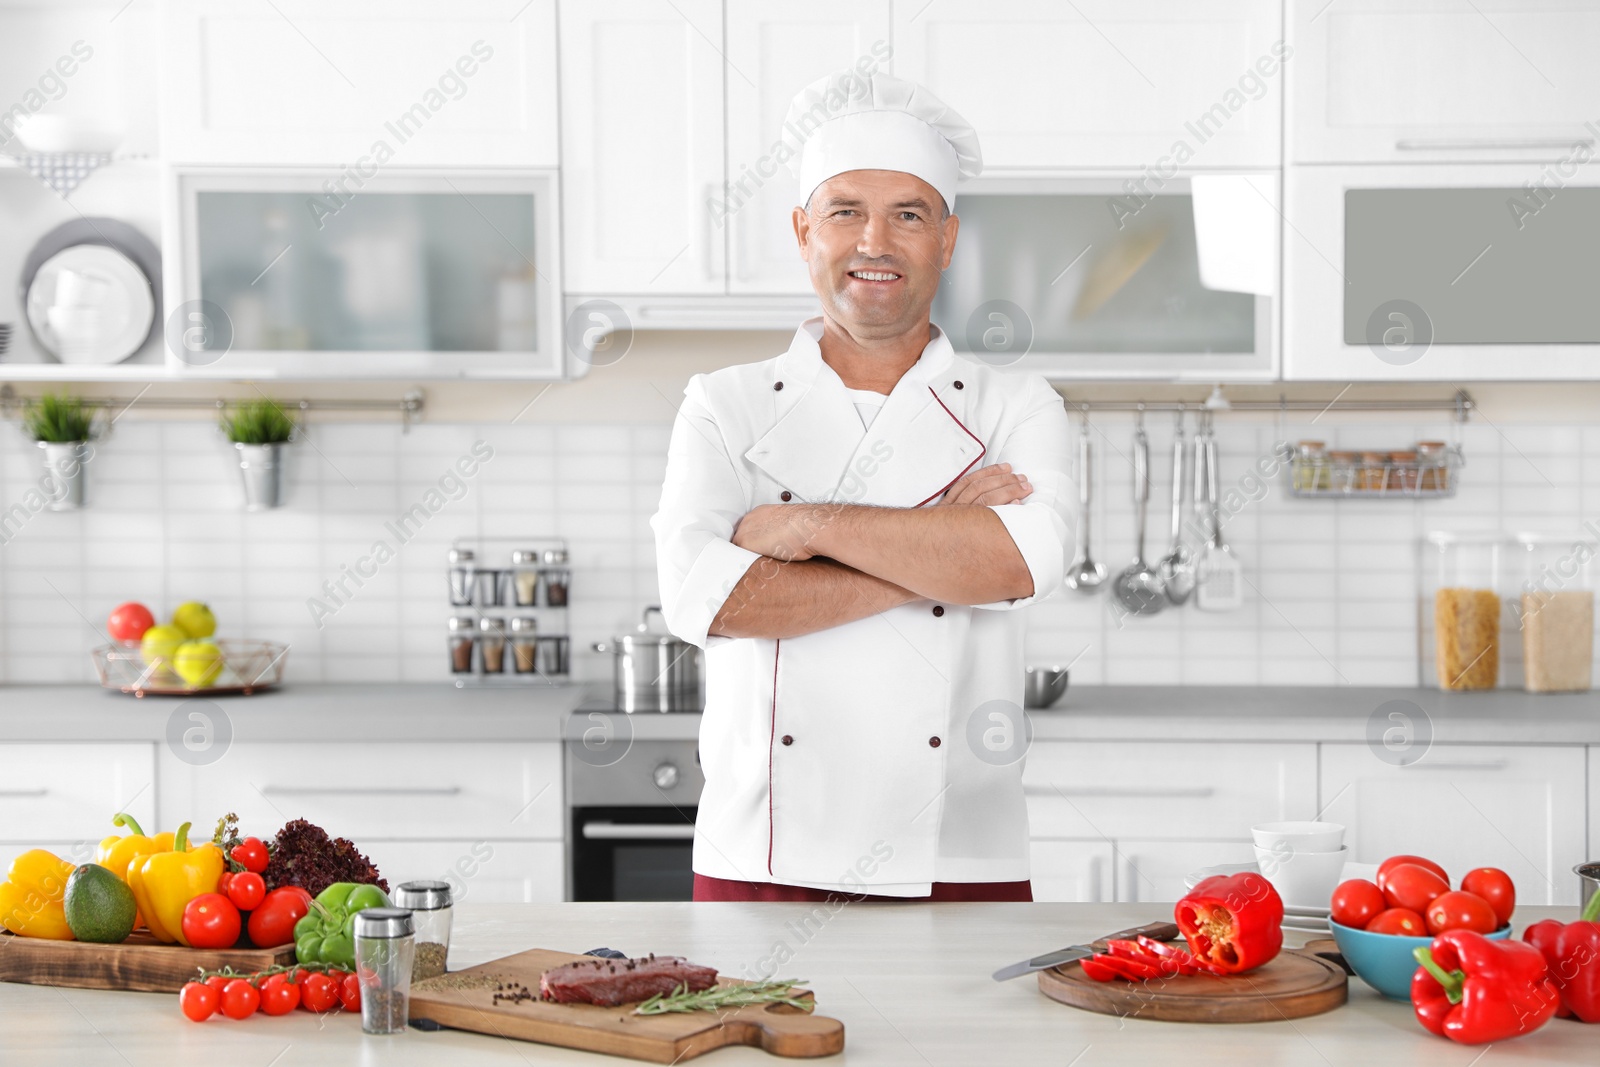 Photo of Professional male chef standing near table in kitchen